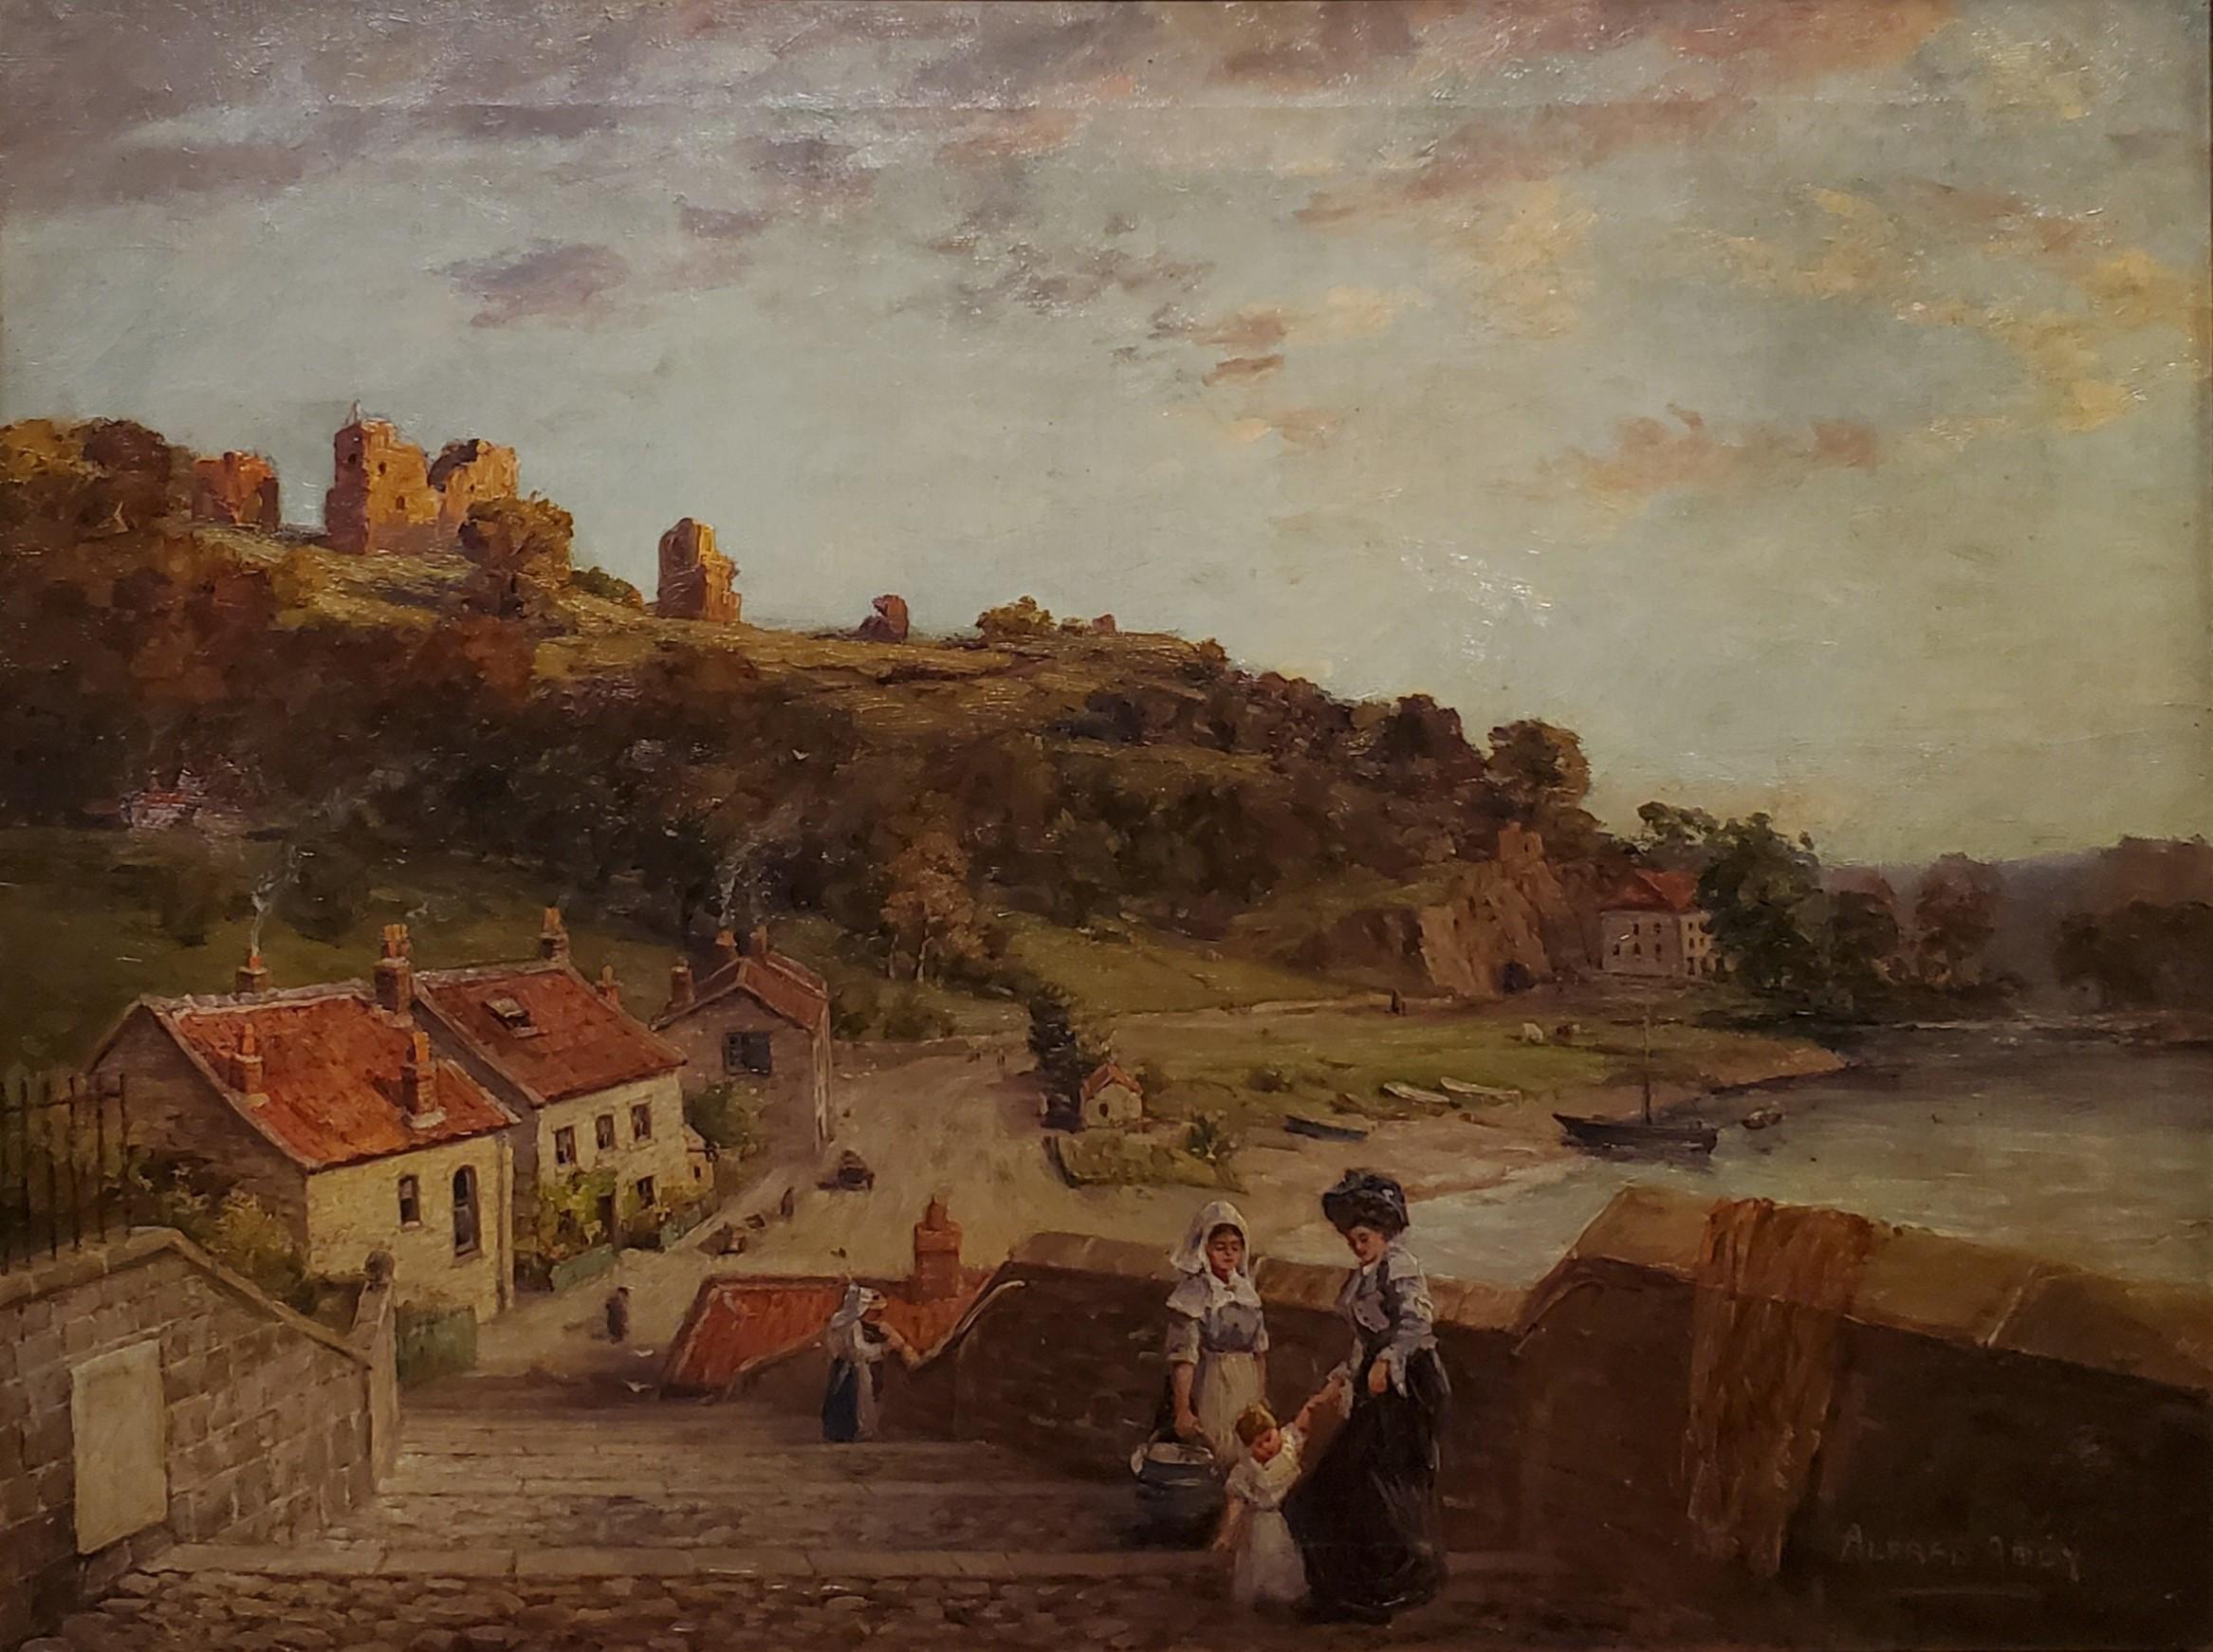 Landscape View of Knaresborough Yorkshire United Kingdom in the 19th Century - Painting by Alfred Addy